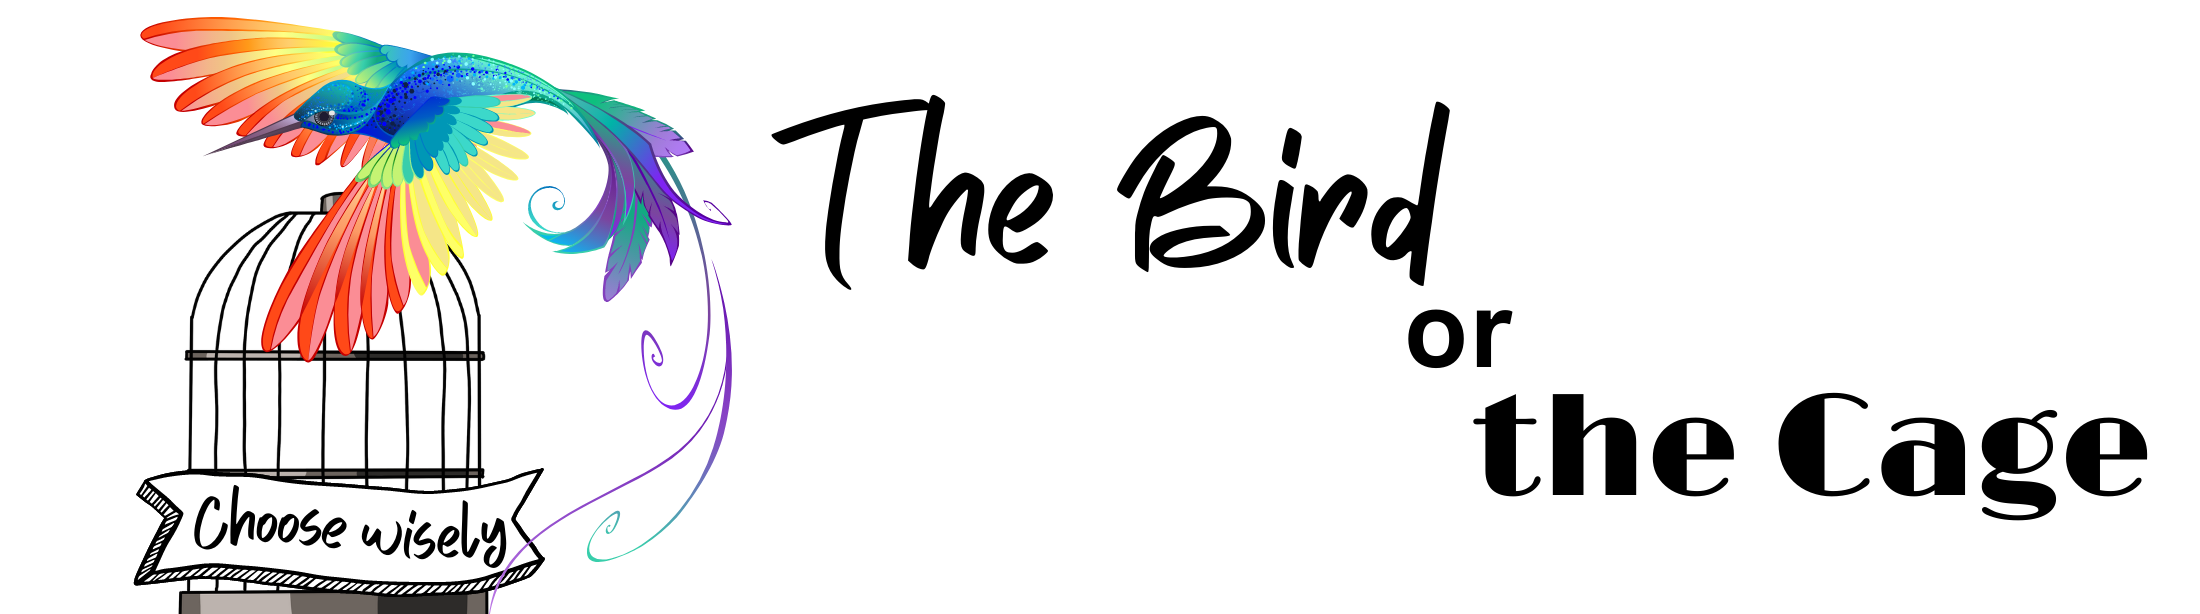 The Bird or the Cage